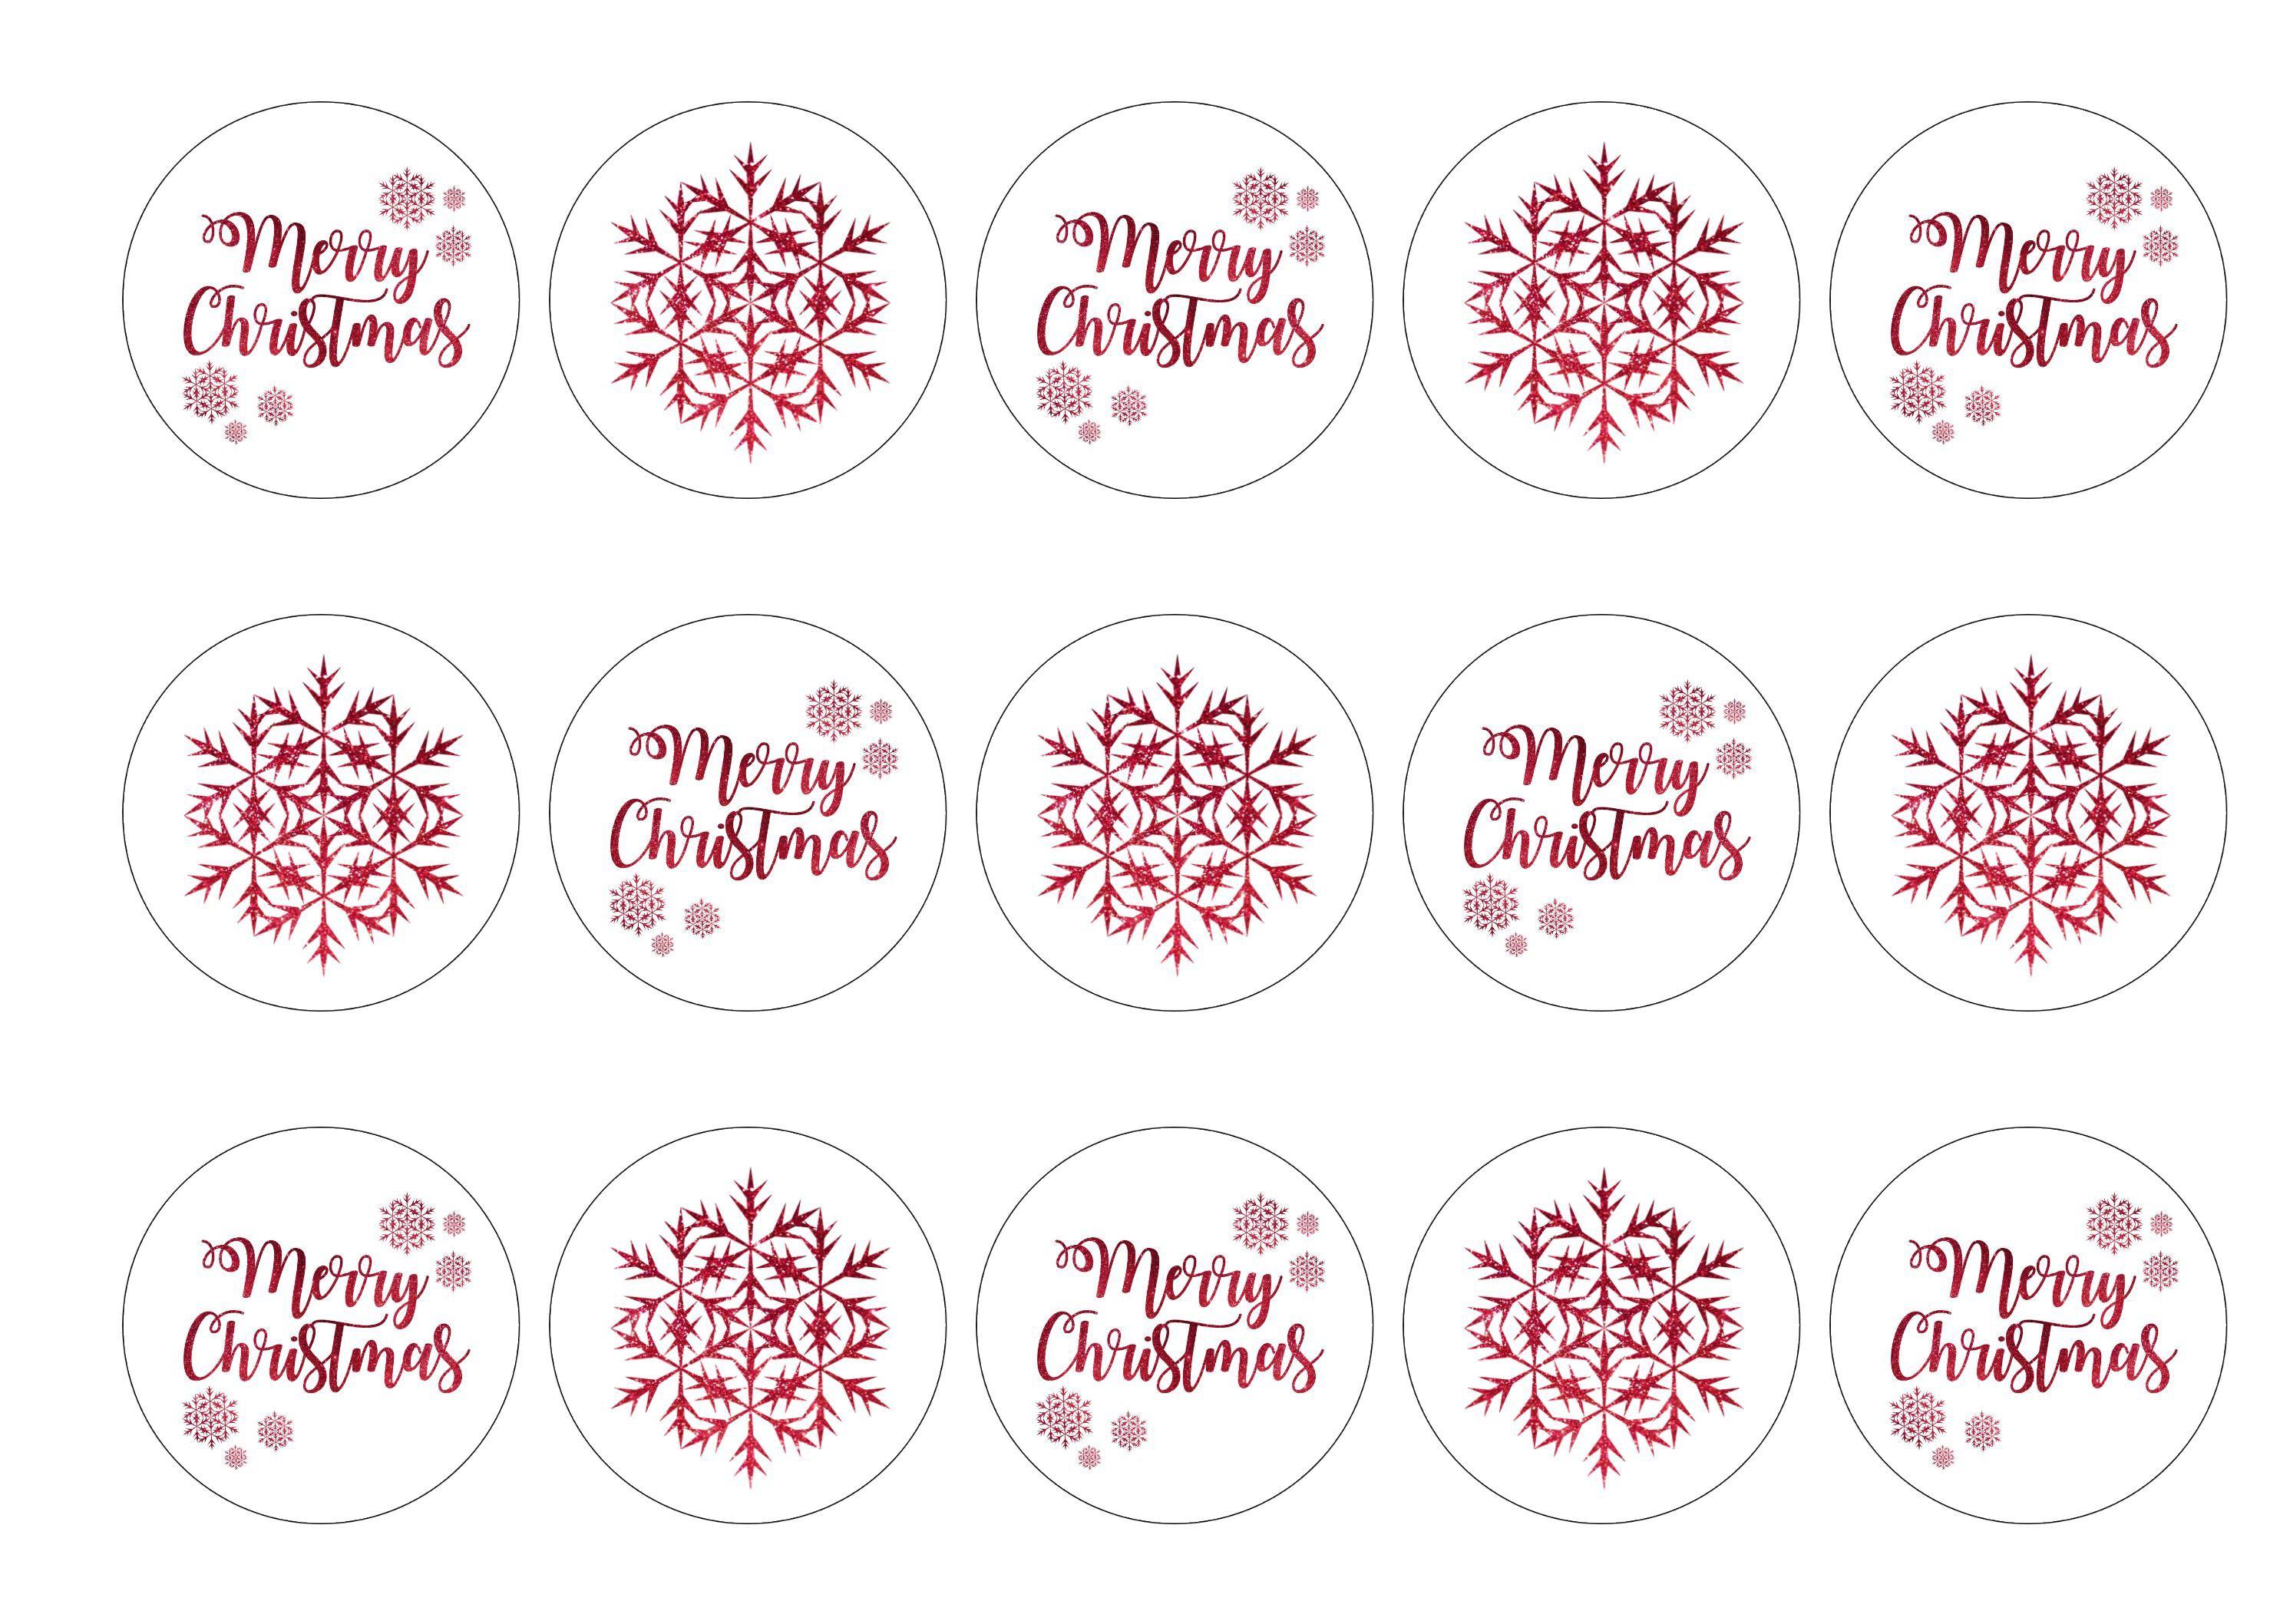 Printed cake toppers with a Merry Christmas message and red snowflakes.